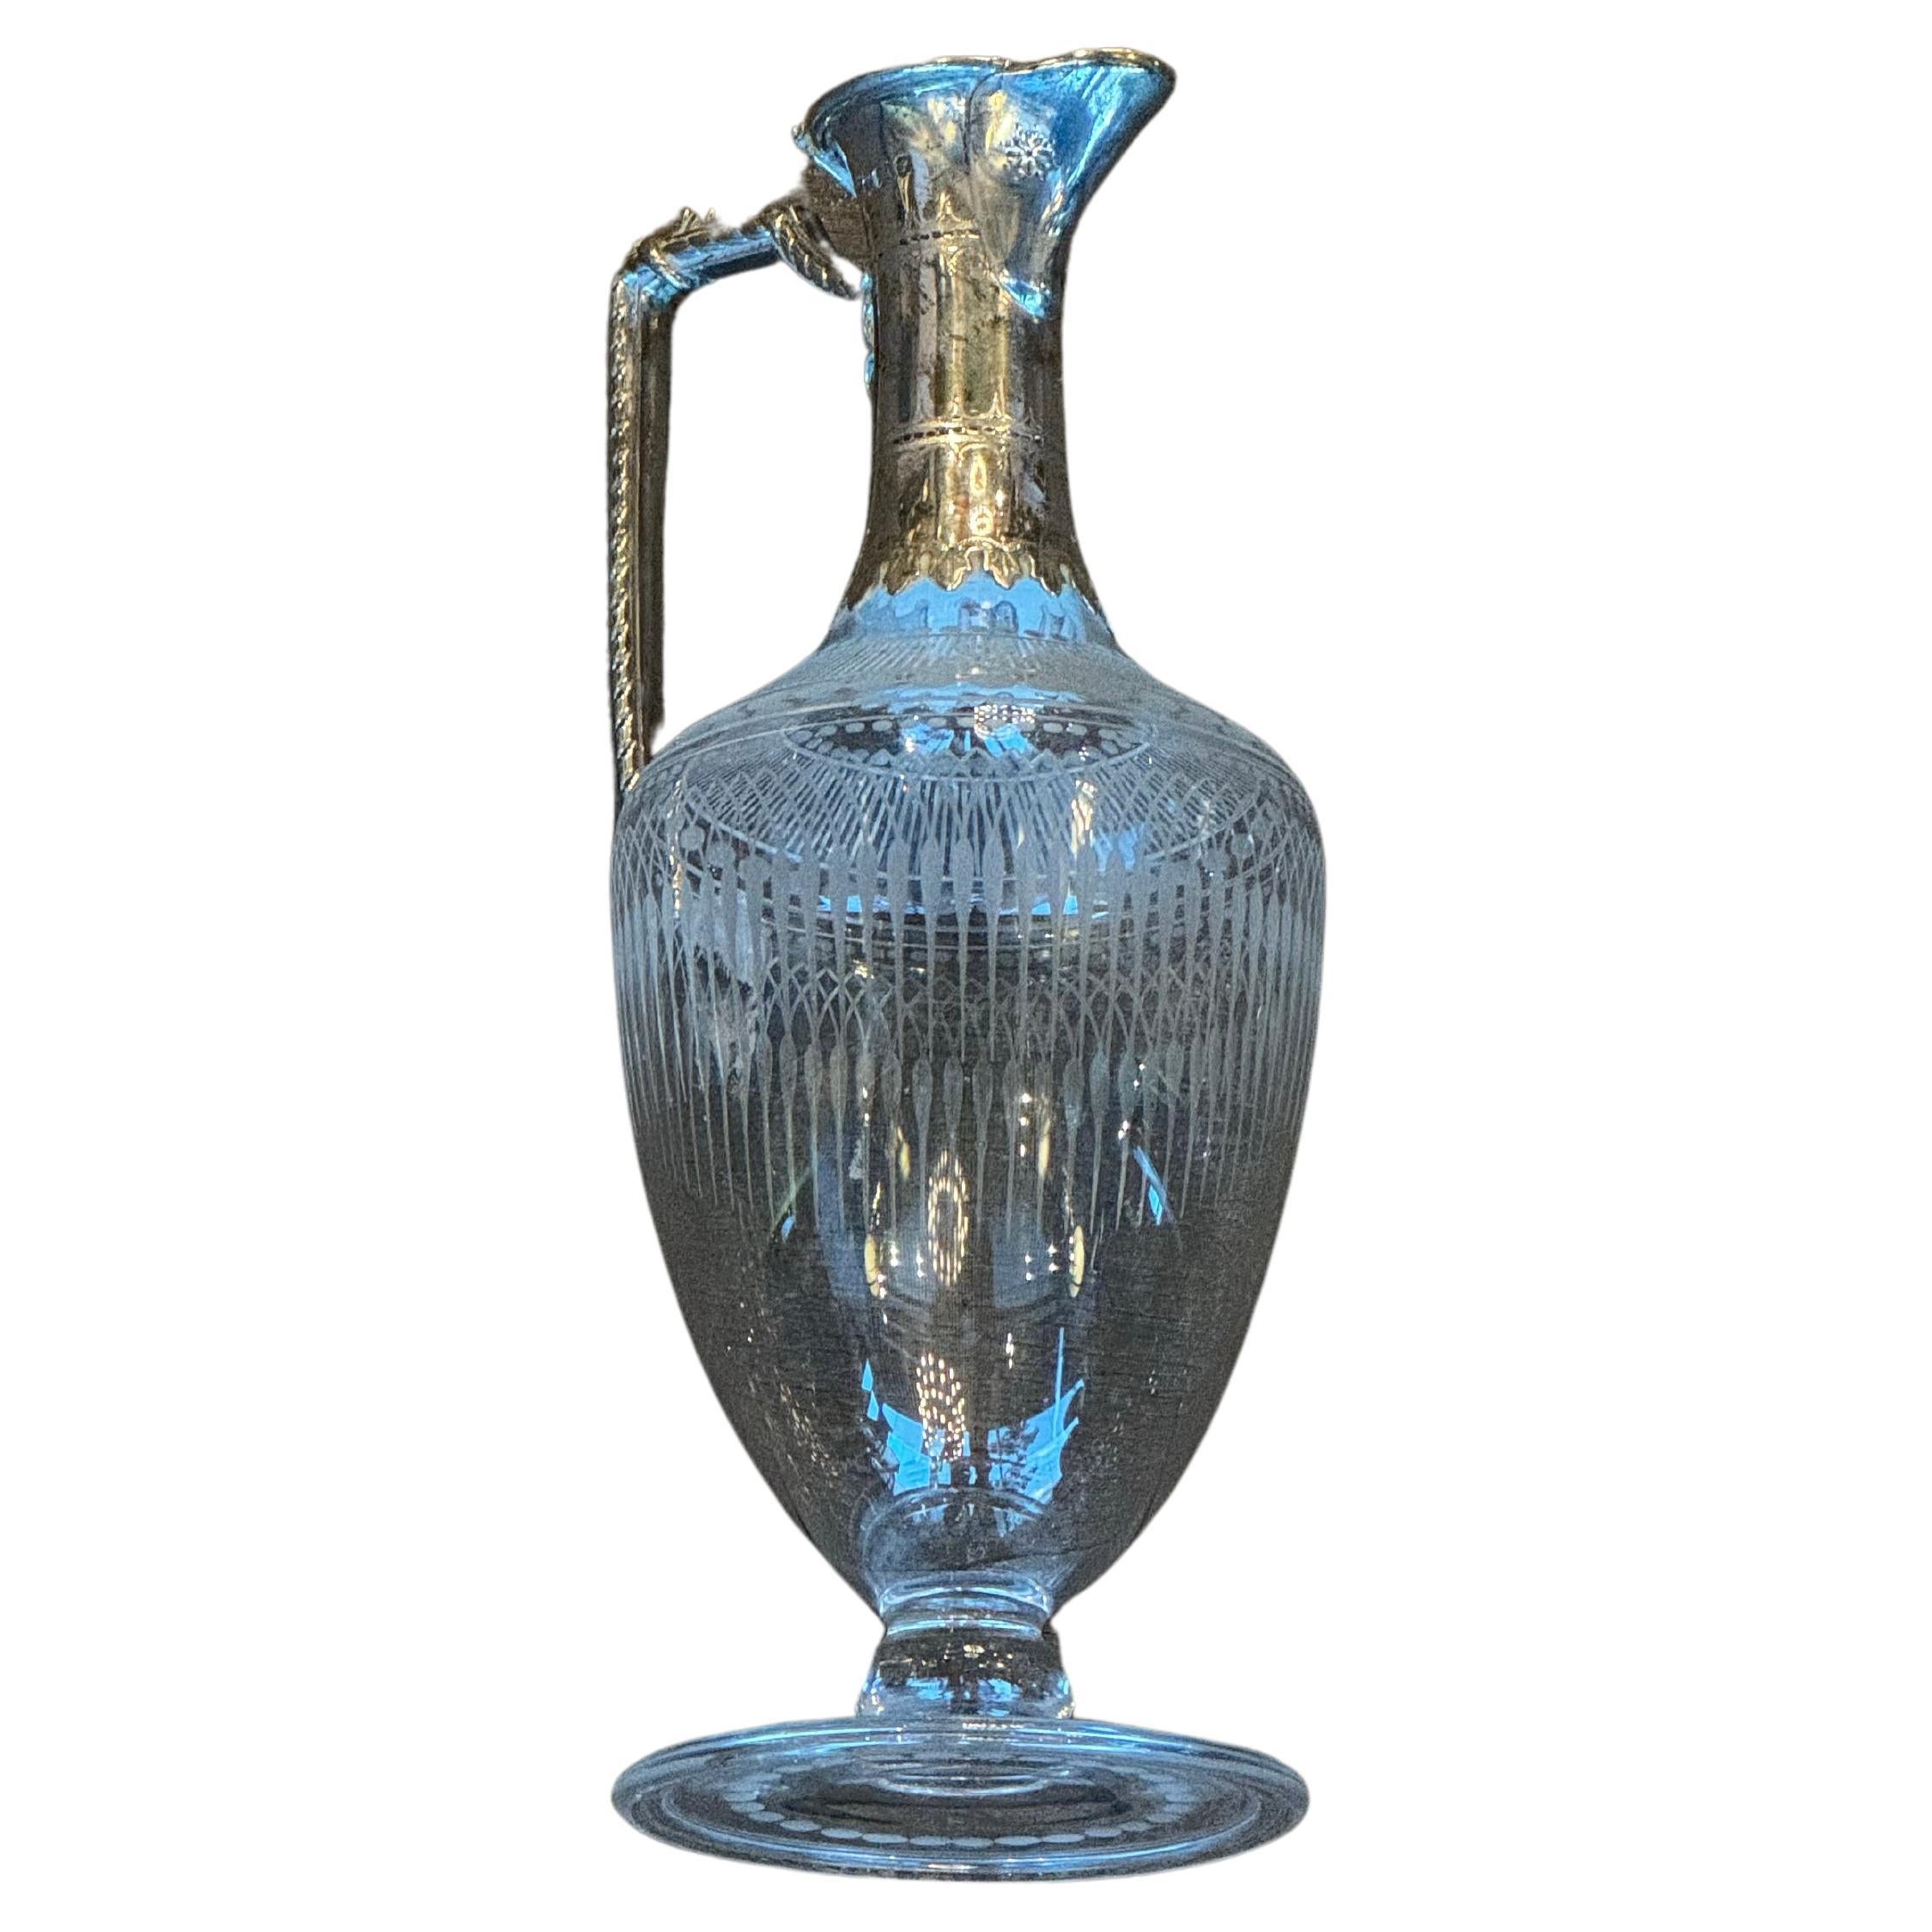 Victorian Sterling Silver Mounted Clear Glass Claret Jug
W & G Sessions, Sheffield and William Hutton & Sons LTD
Sourced from London, England Circa 1872 & 1898